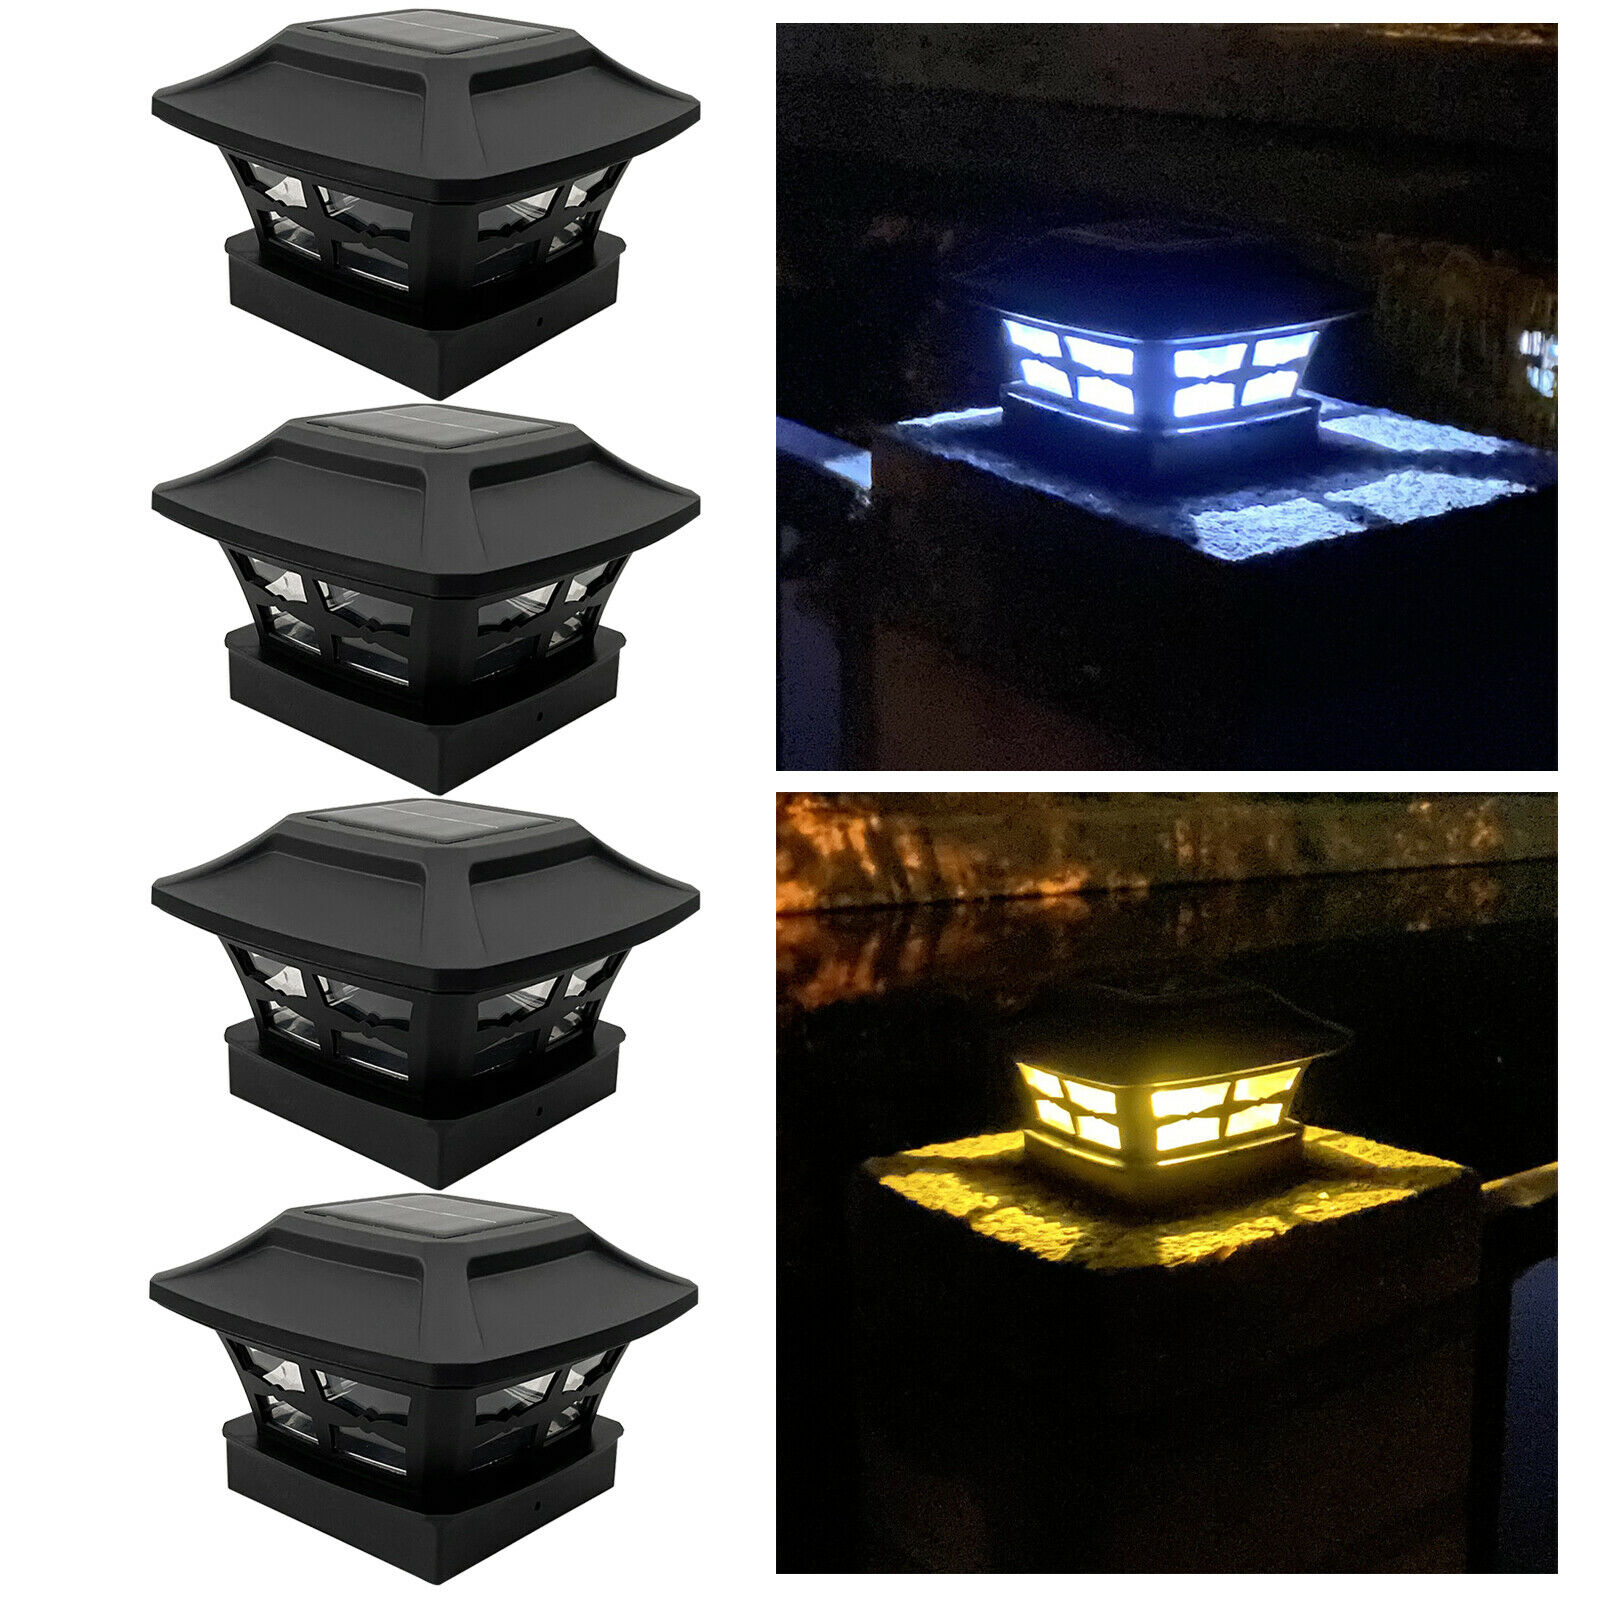 Home Zone Security Solar Post Lights - Outdoor Solar Post Cap Lights for 3.5 x 3.5 and 4 x 4 Posts, White (2-Pack)